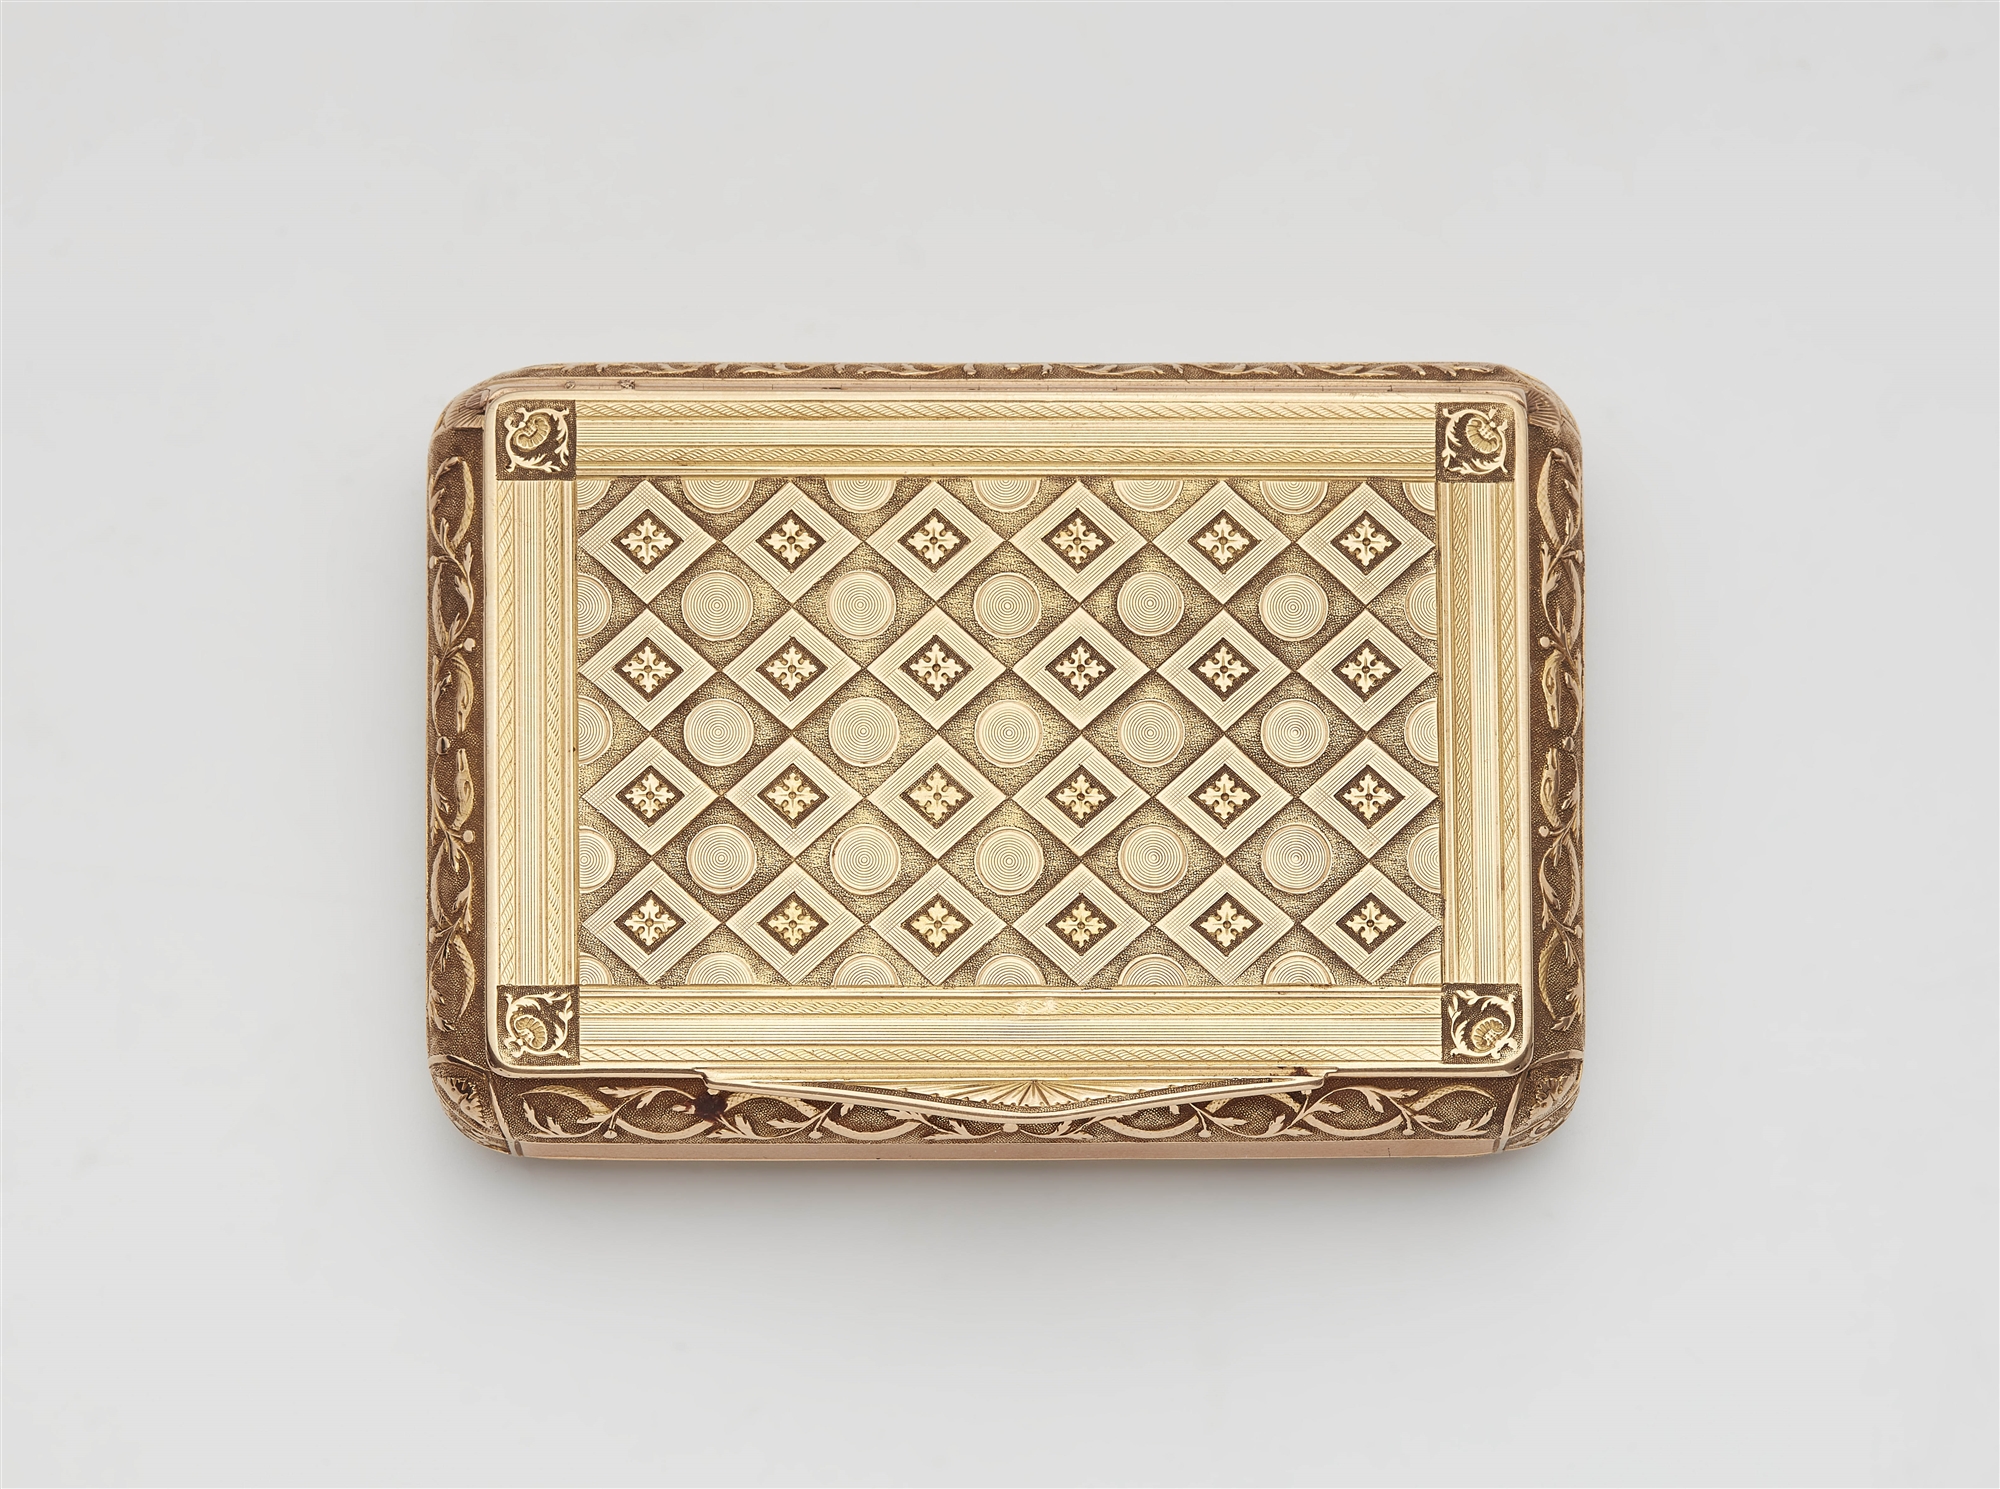 A 14k gold presentation snuff box from Prince Wilhelm of Prussia - Image 4 of 5